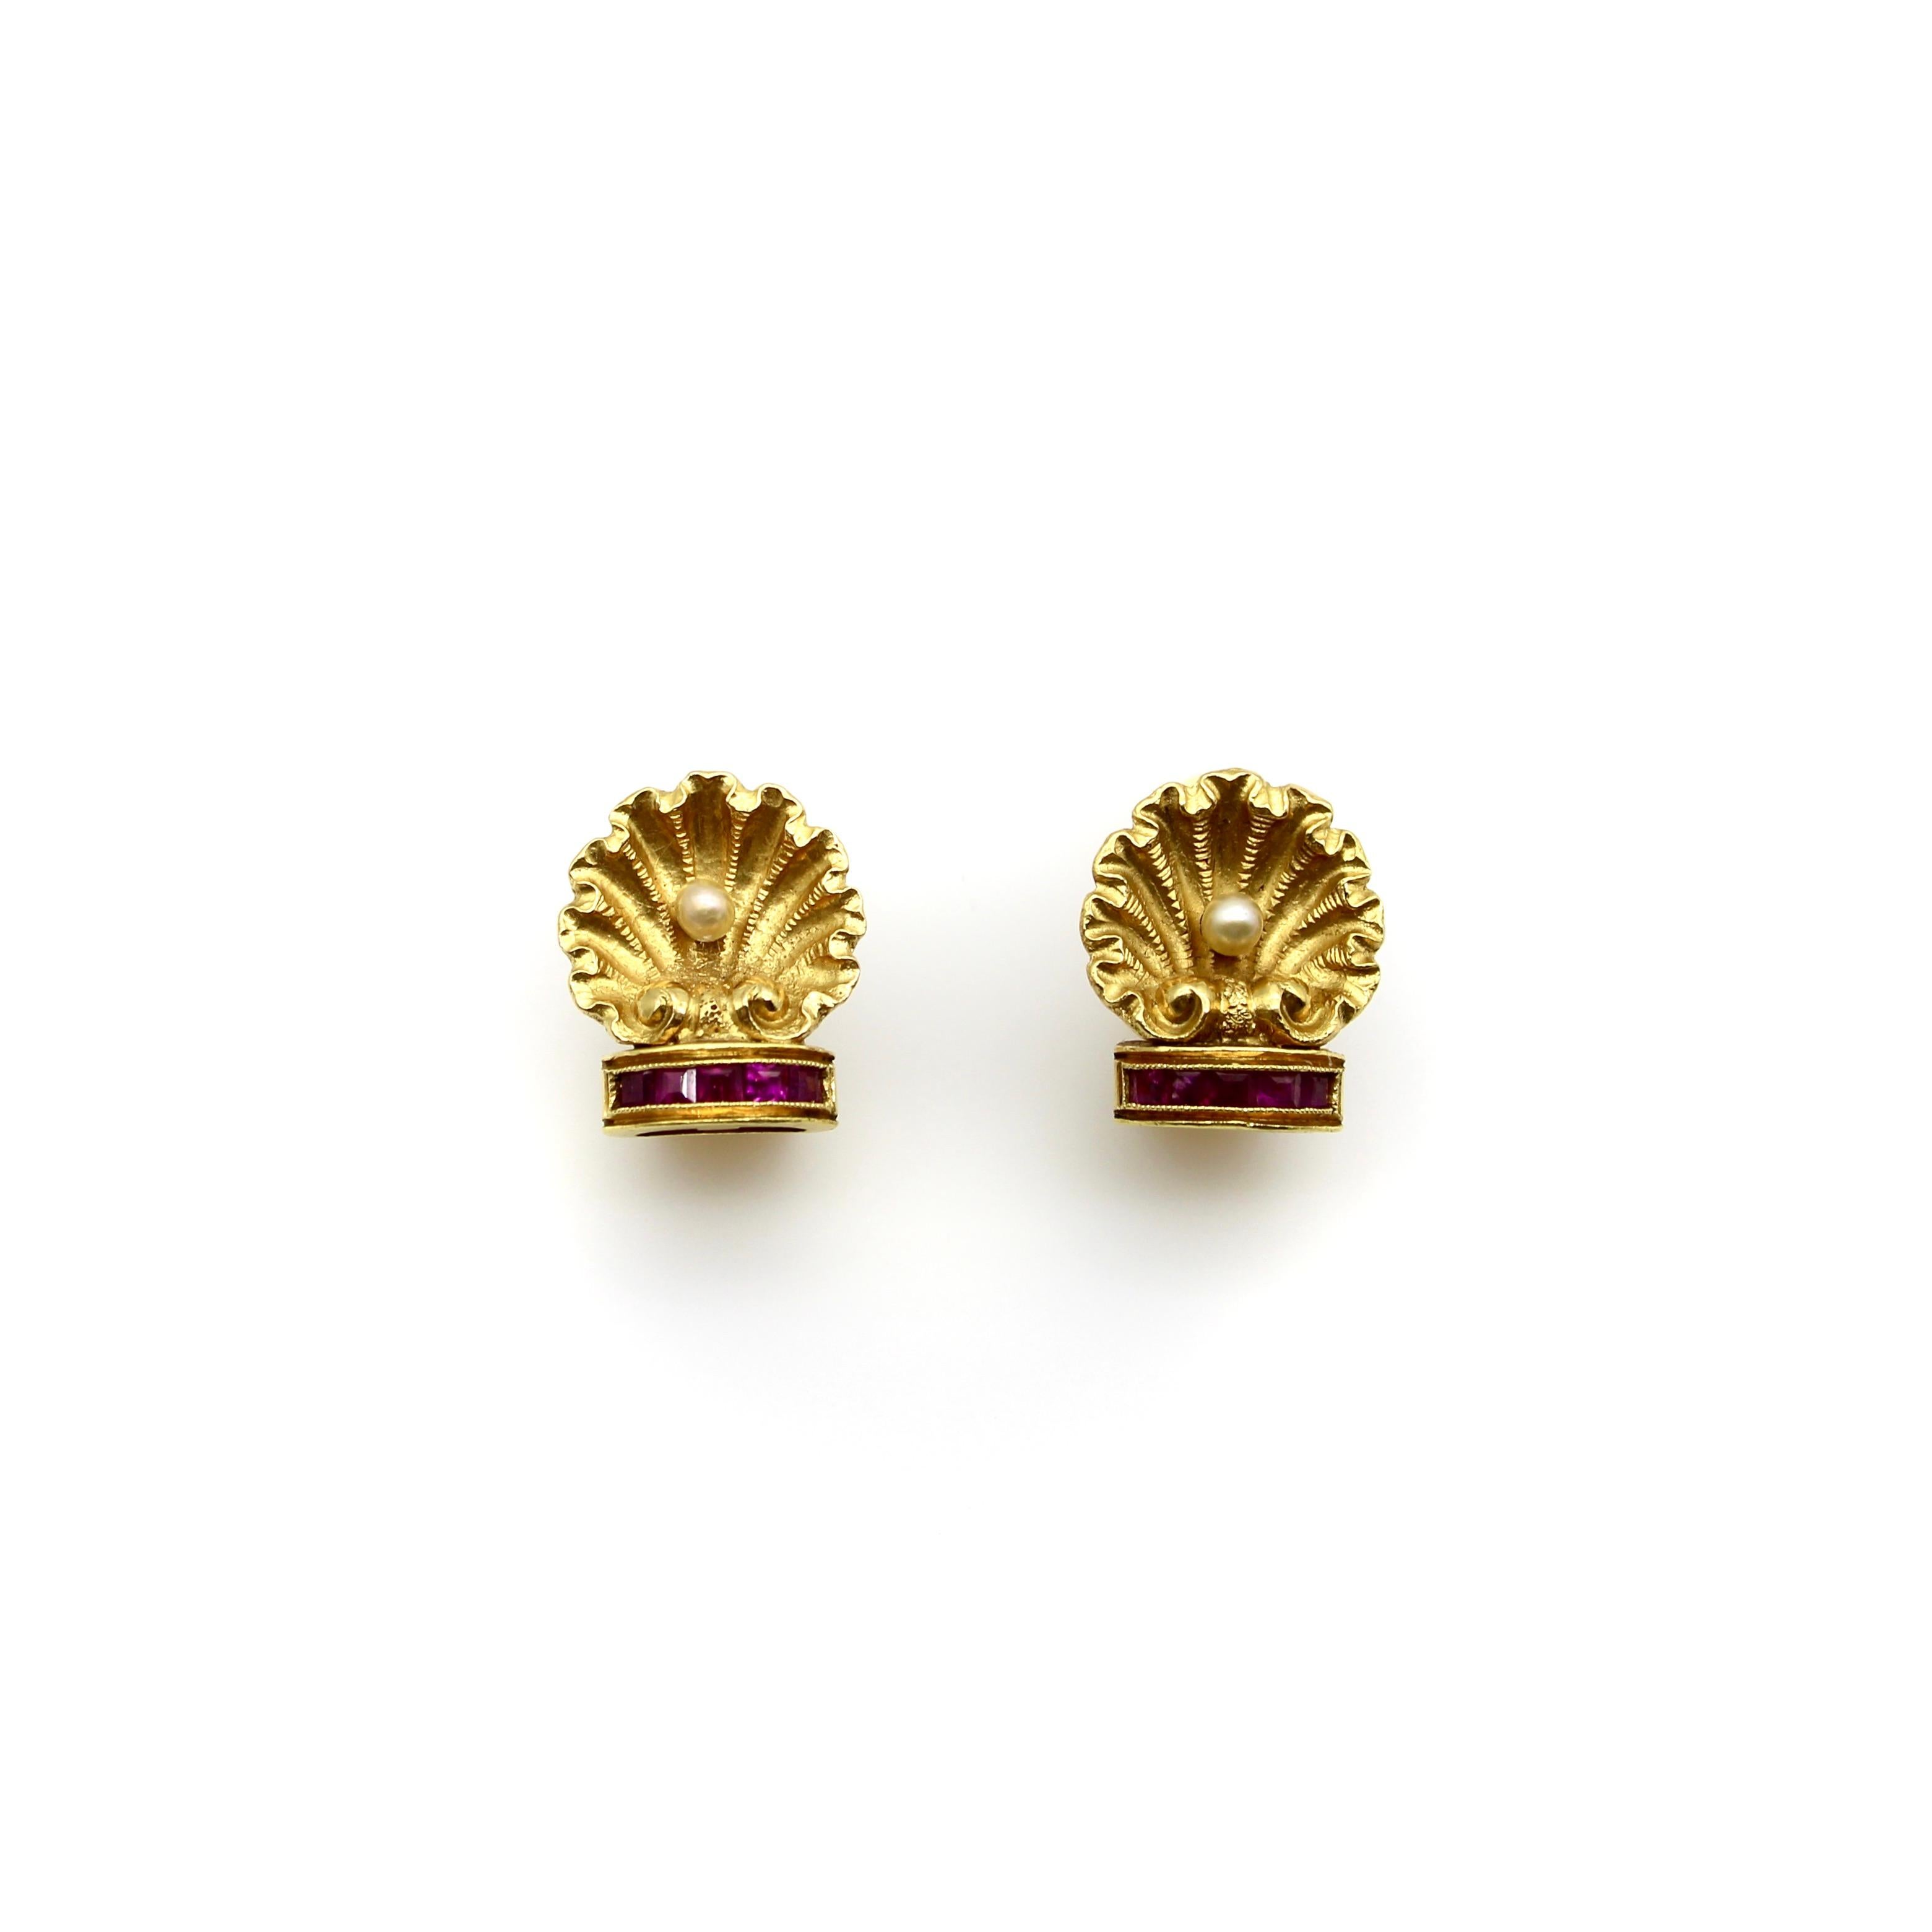 These 19.2k gold earrings are small, but have stunning theatricality to them—like tiny versions of an ornate architectural detail. Each earring is a beautifully rendered shell, opened to reveal a pearl at the bottom. The shell sits on a half-dome of